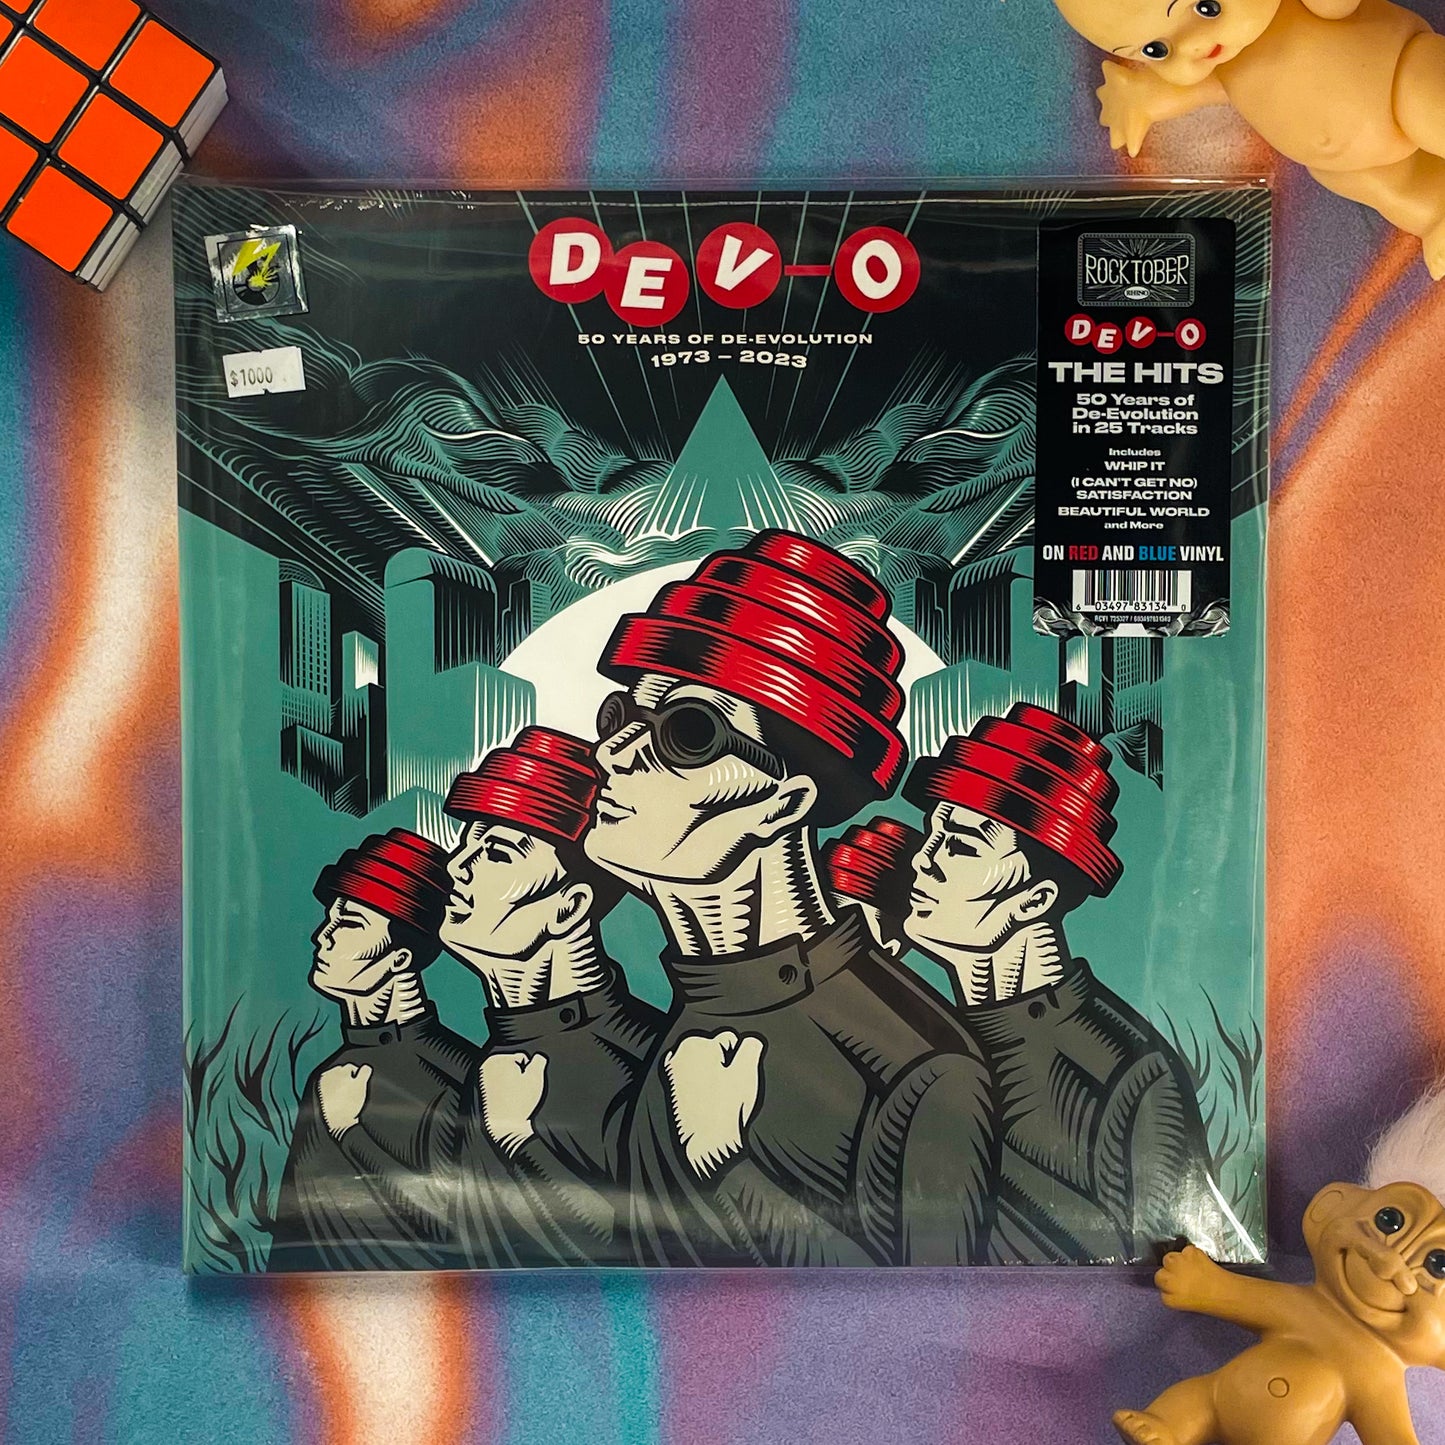 DEVO - 50 YEARS OF DE-EVOLUTION “THE HITS” (RED AND BLUE)